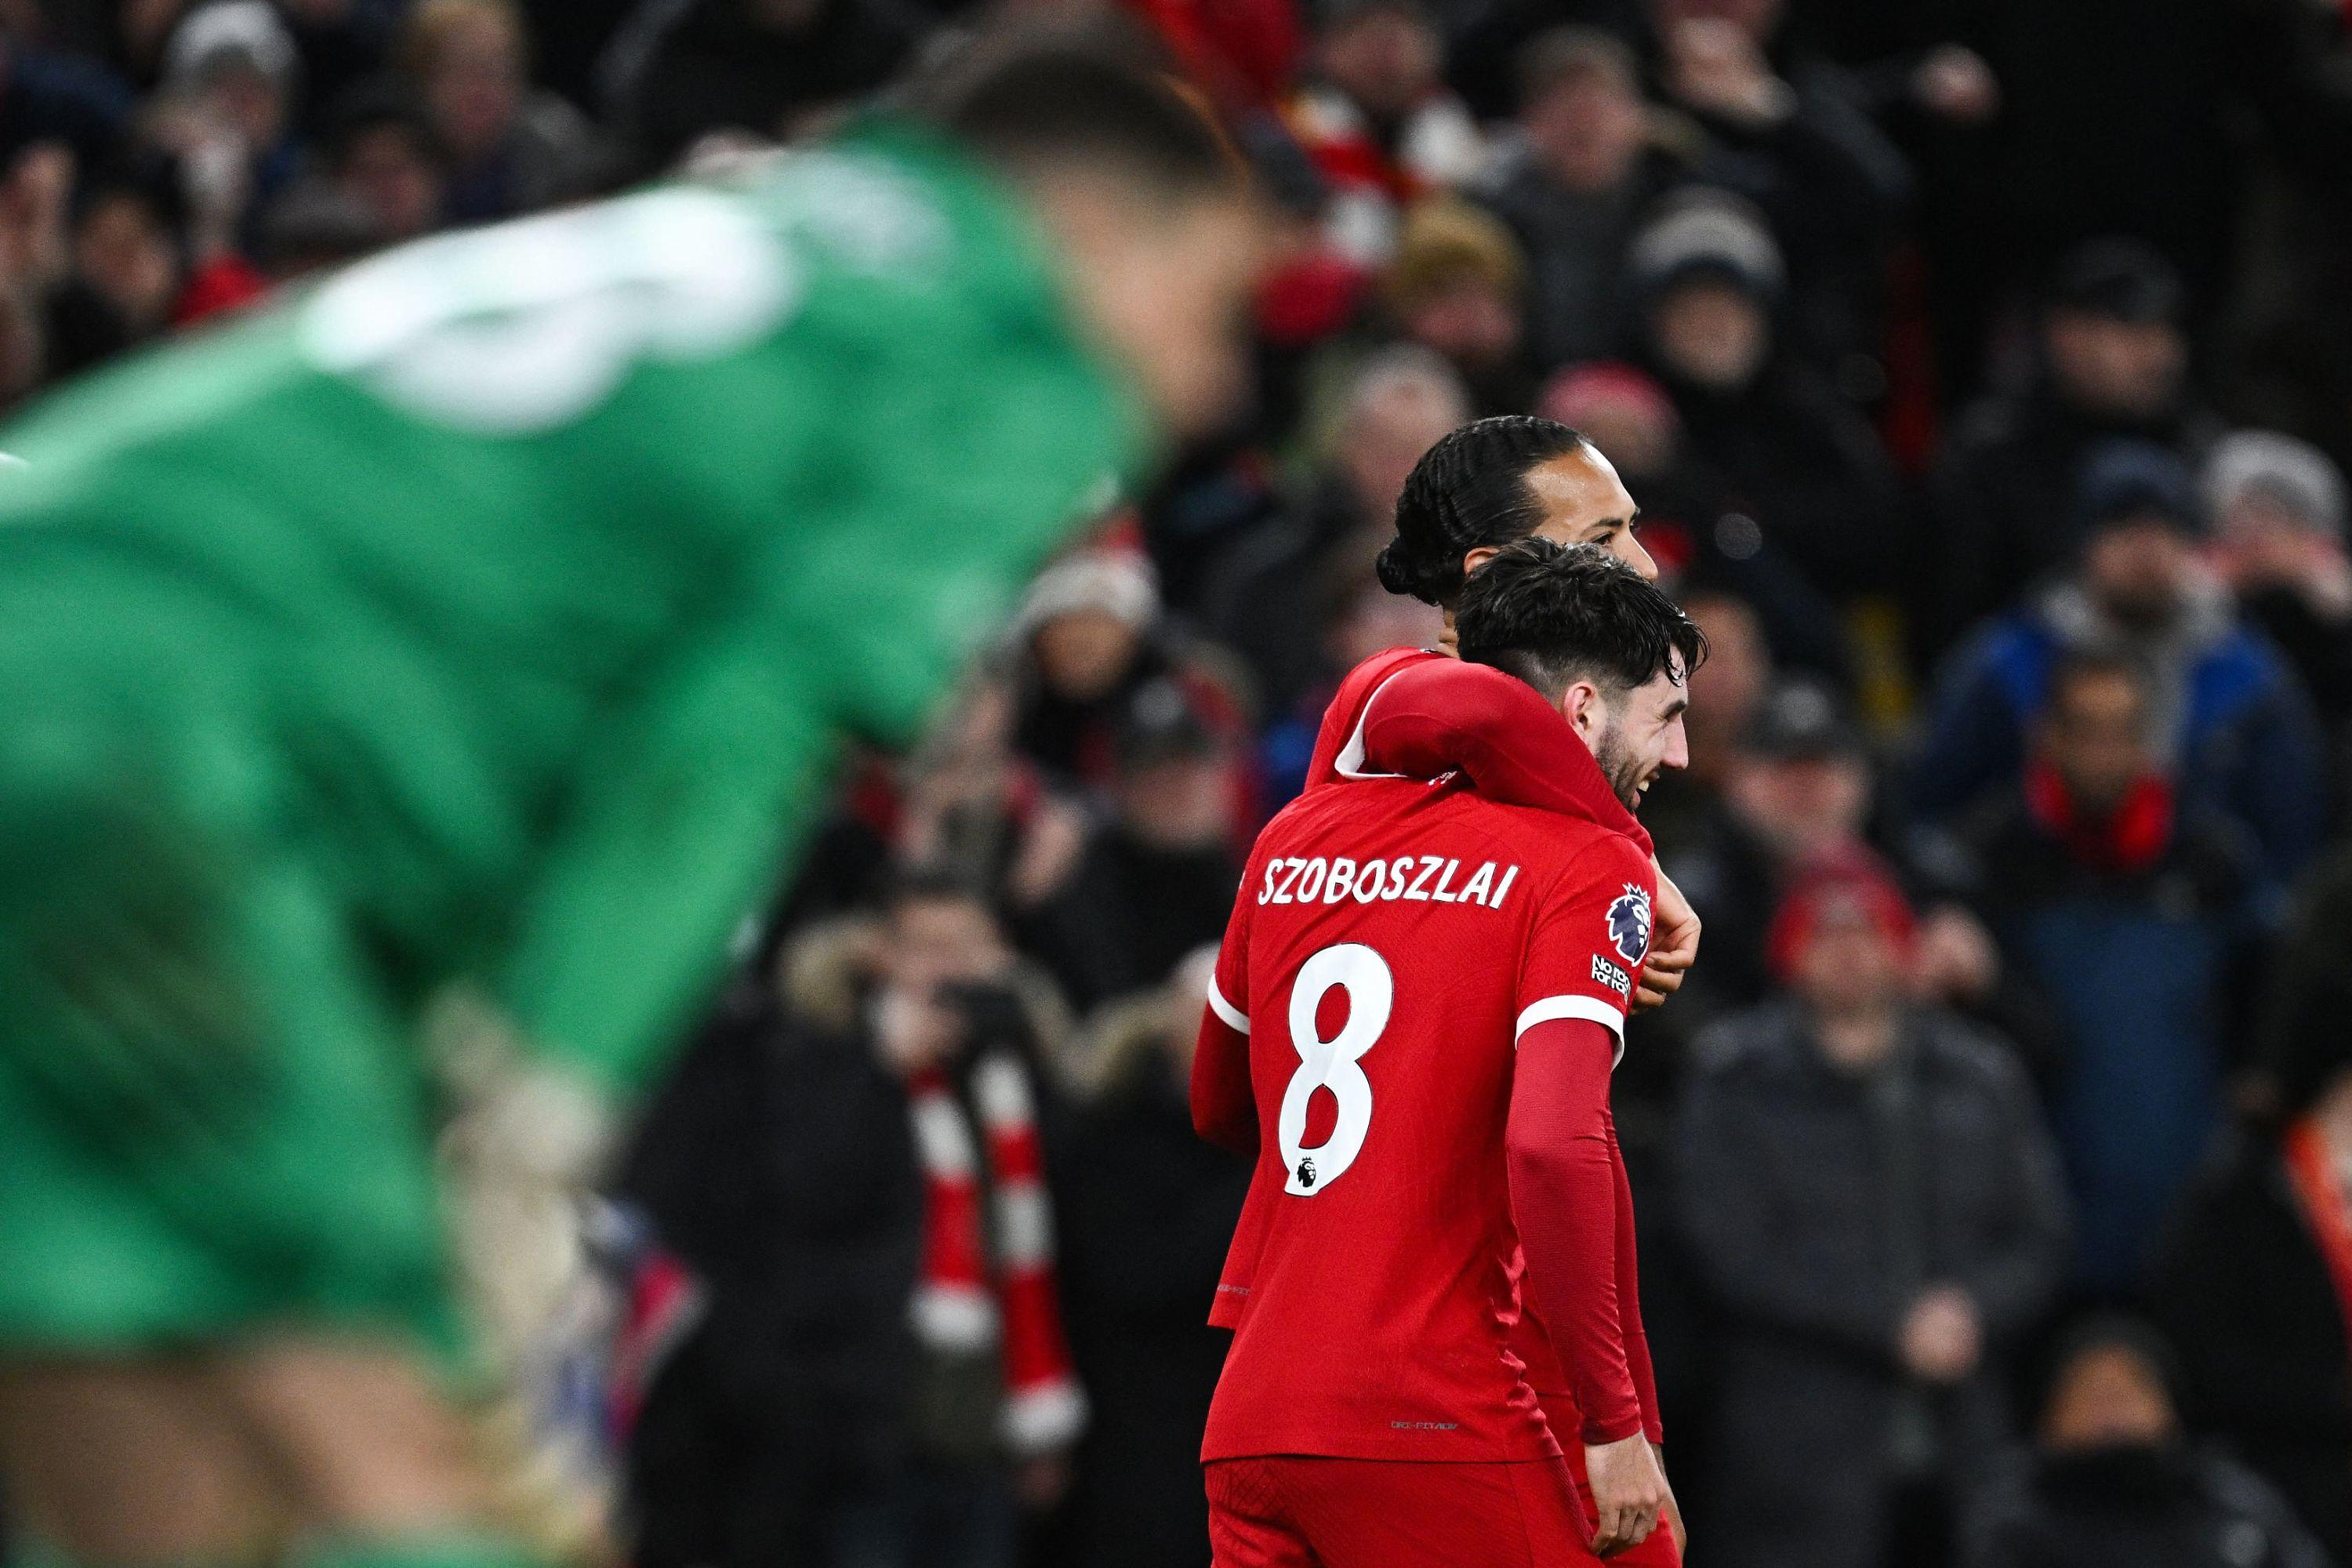 Premier League: Liverpool crushes Chelsea and consolidates its leadership position, City unwinds and Tottenham overwhelms